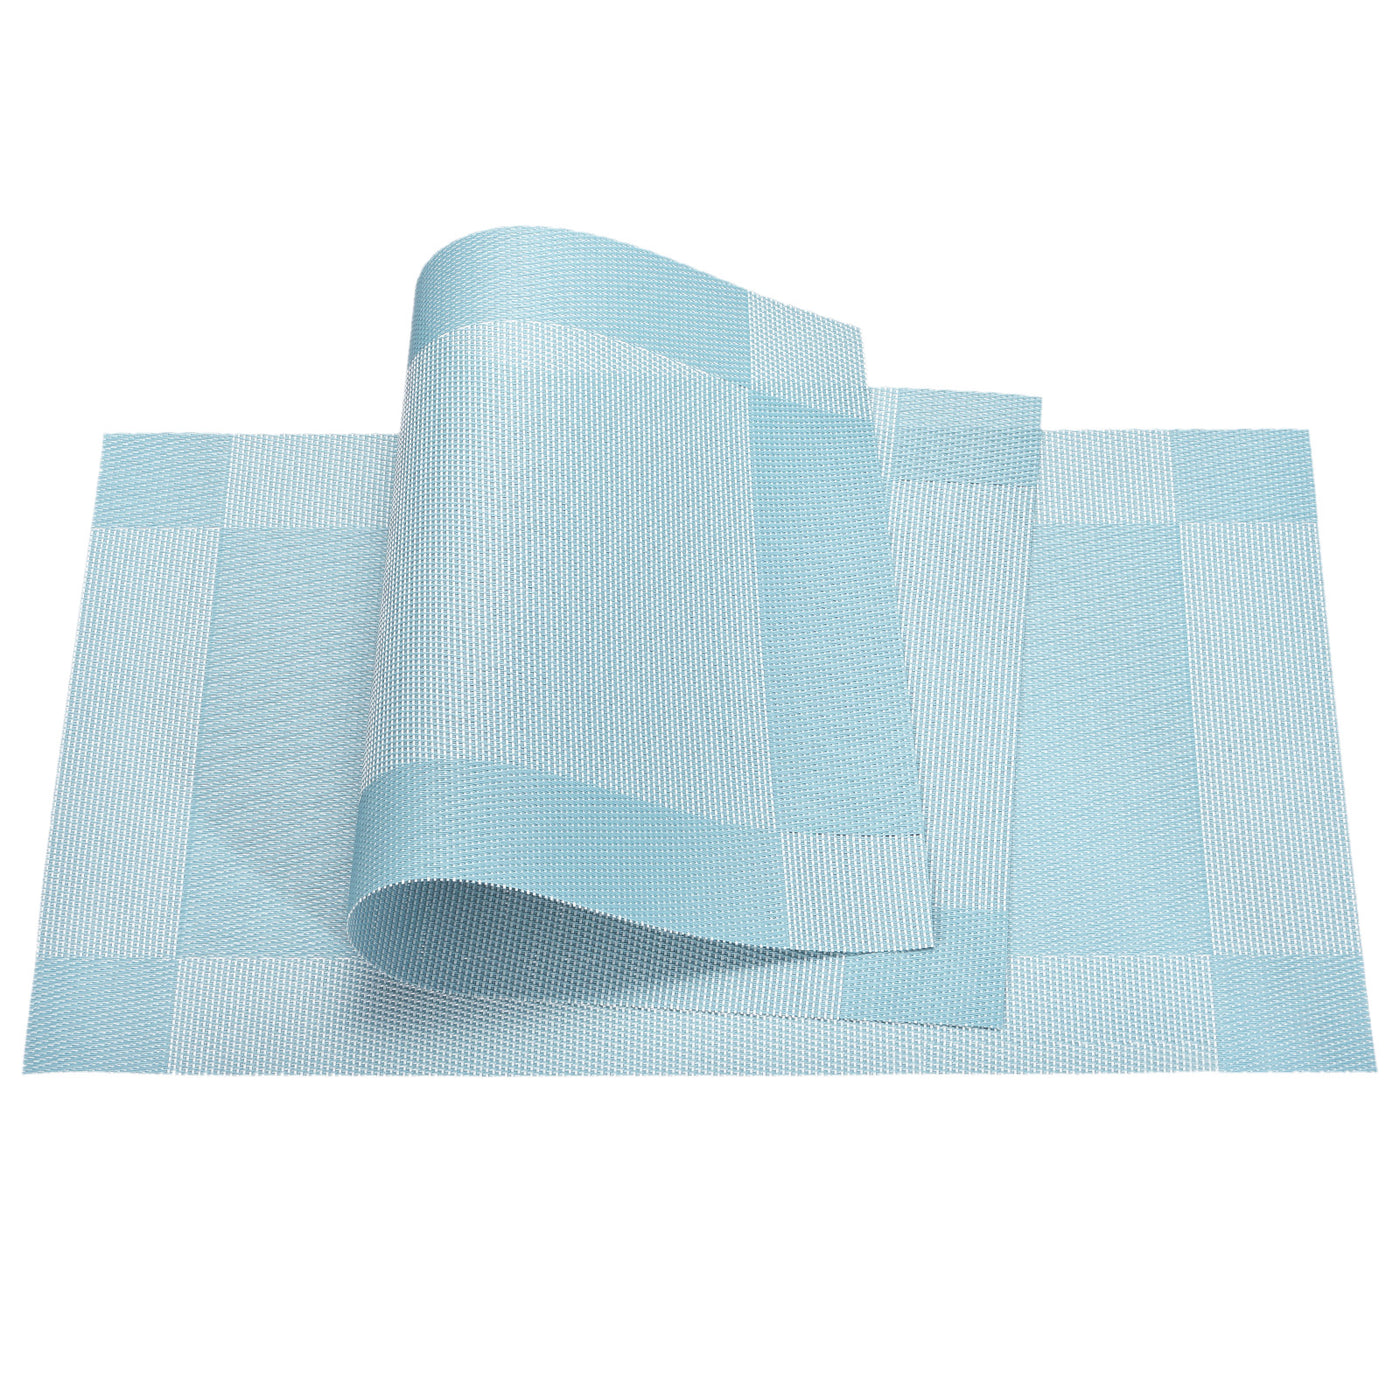 uxcell Uxcell Place Mats 450x300mm 2pcs PVC Table Washable Woven Placemat, Lake Blue